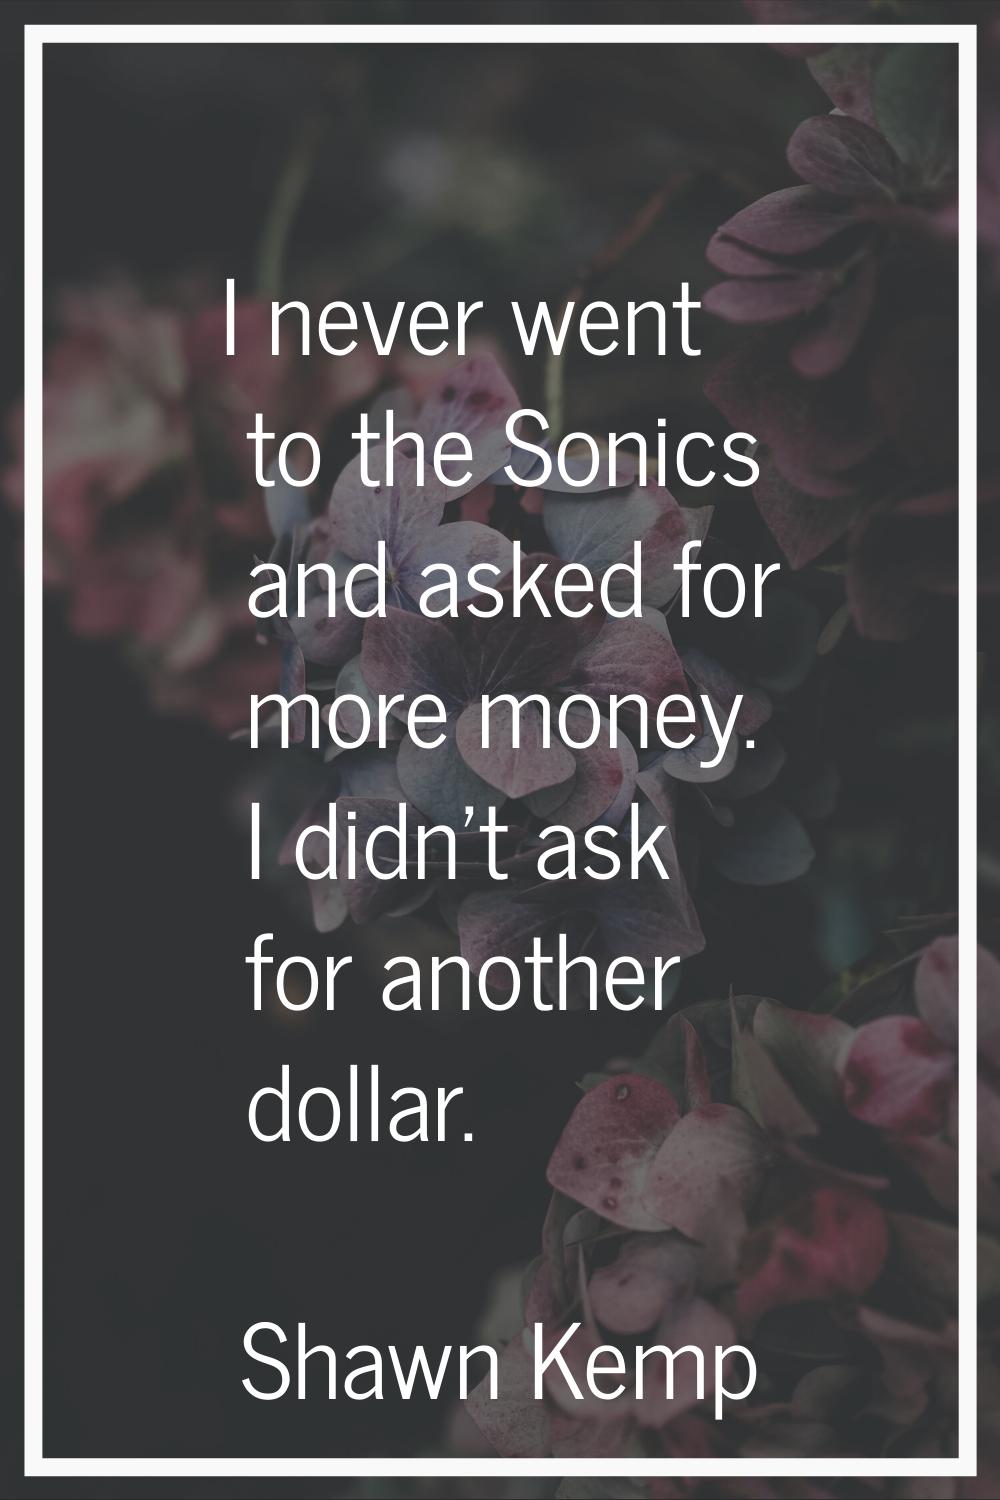 I never went to the Sonics and asked for more money. I didn't ask for another dollar.